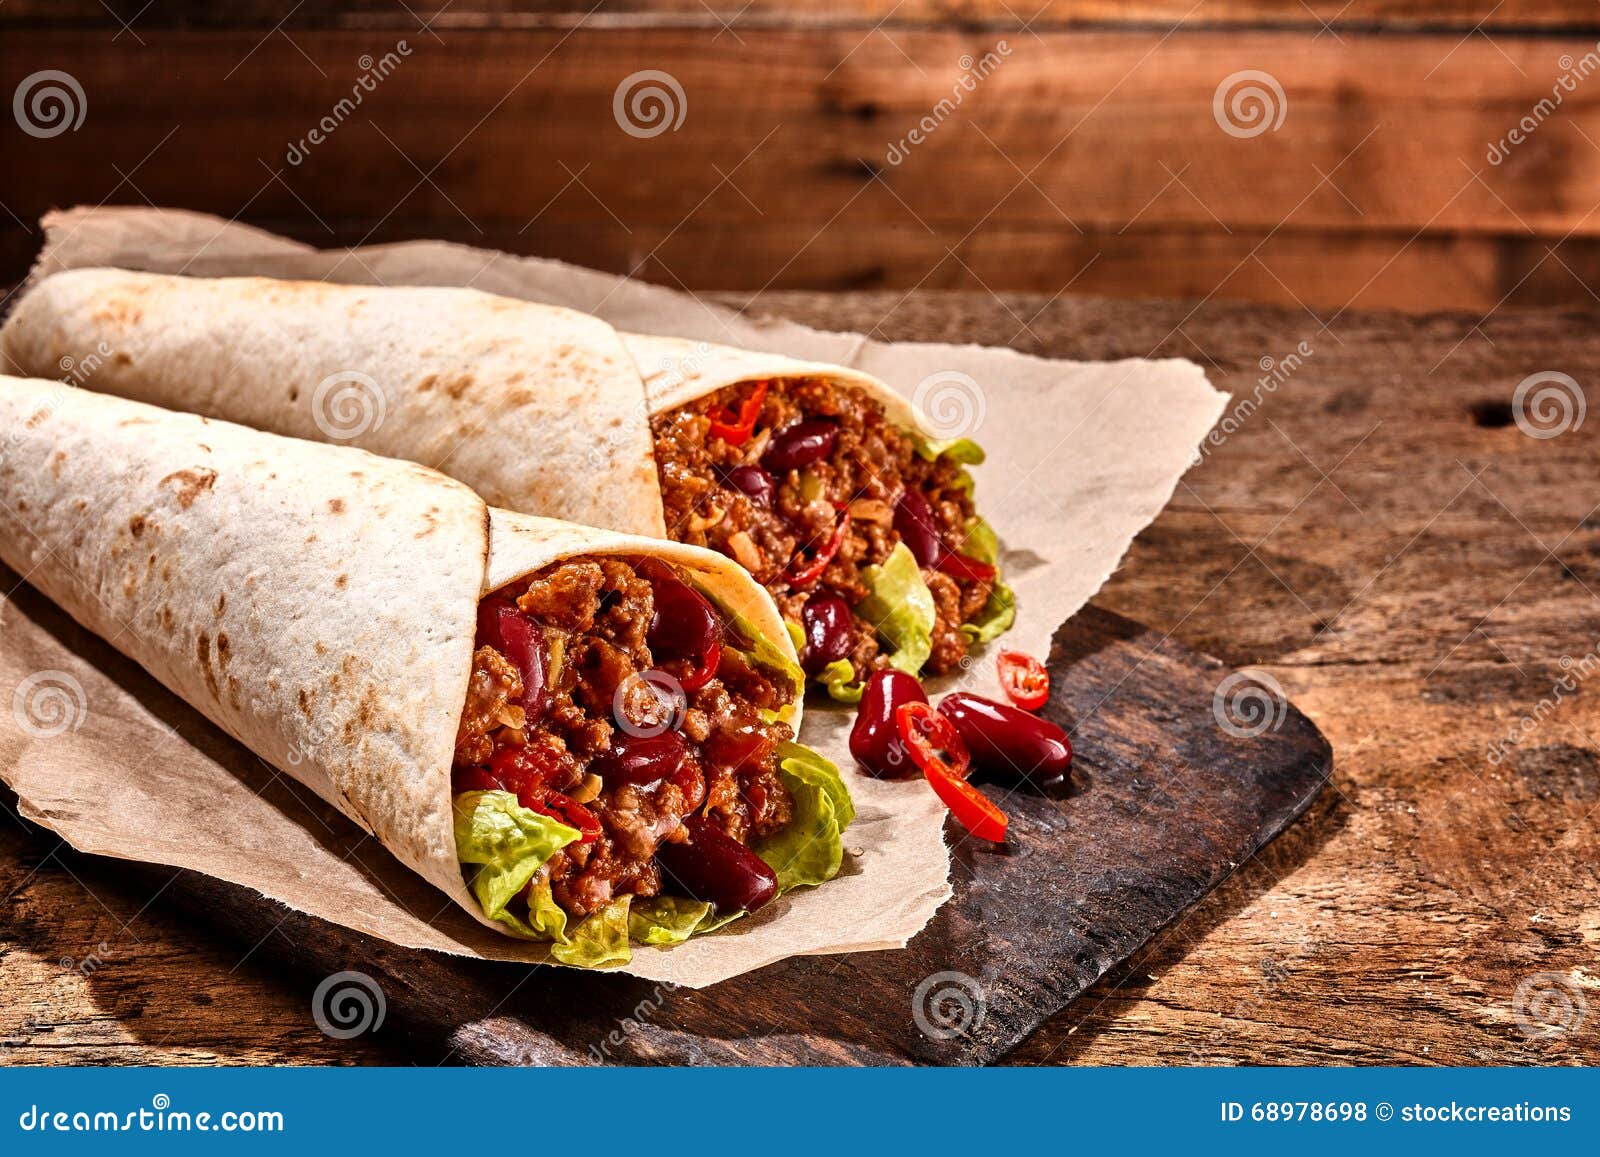 pair of chili stuffed tex mex wraps on wood table